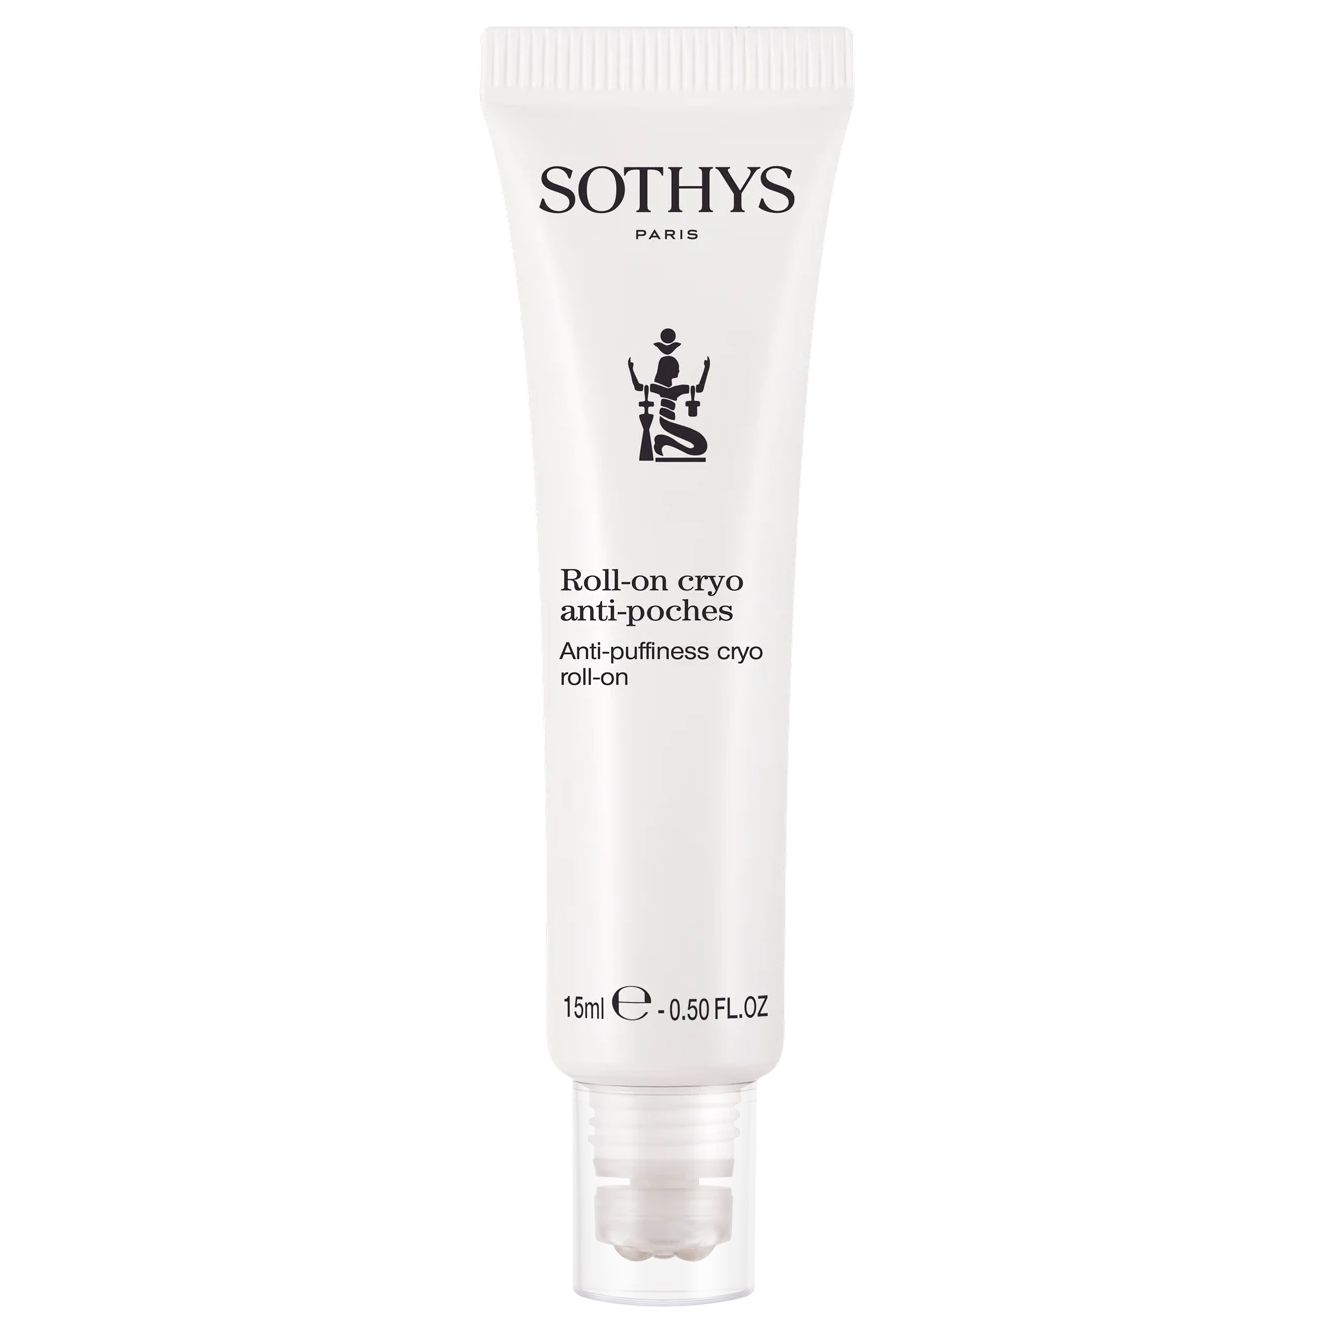 Sothys Anti-Puffiness Cryo Roll-on